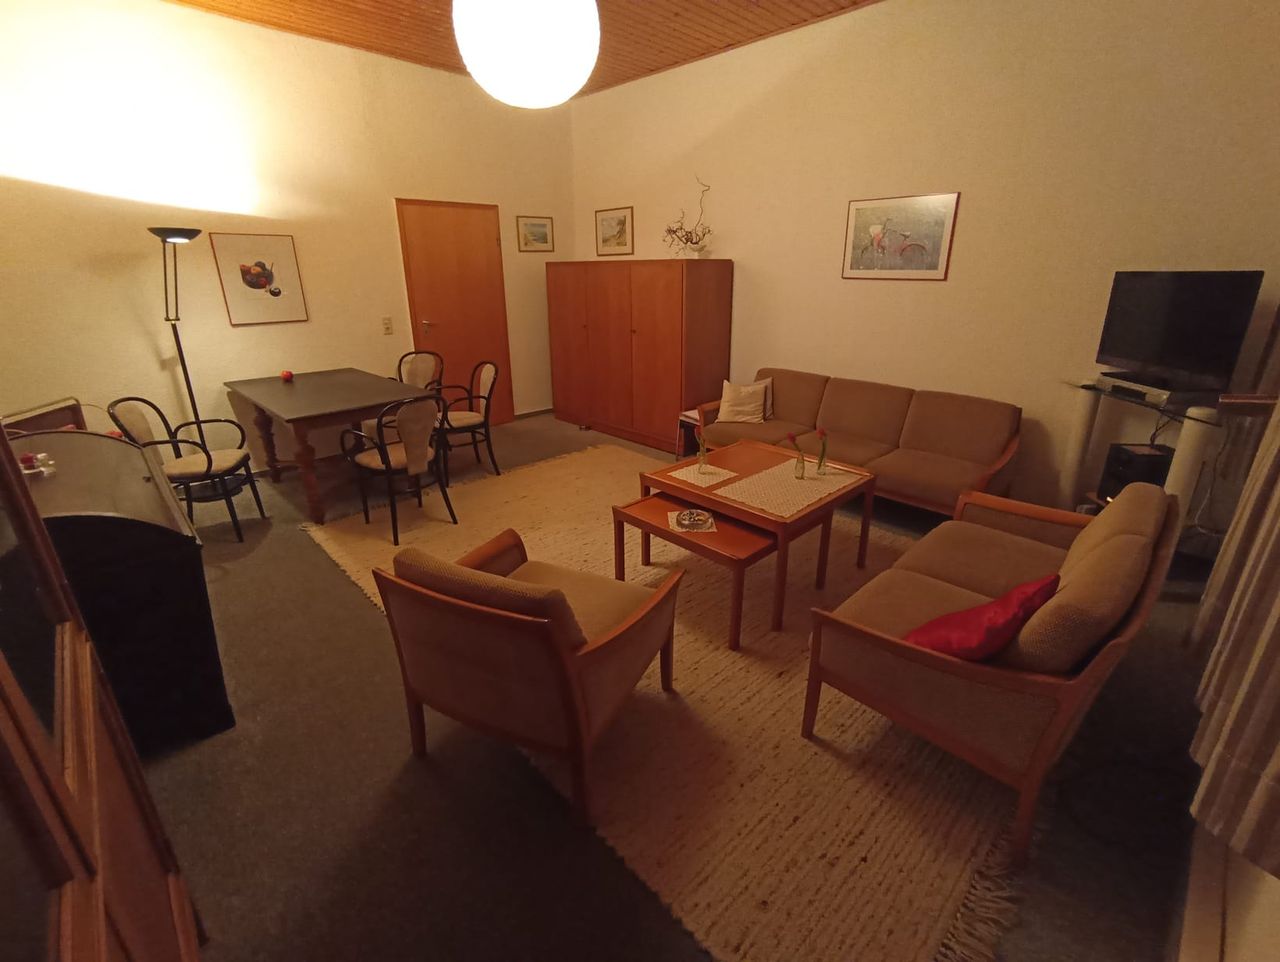 Flat in Wuppertal - Sublease from 15.04 to 15.07.24